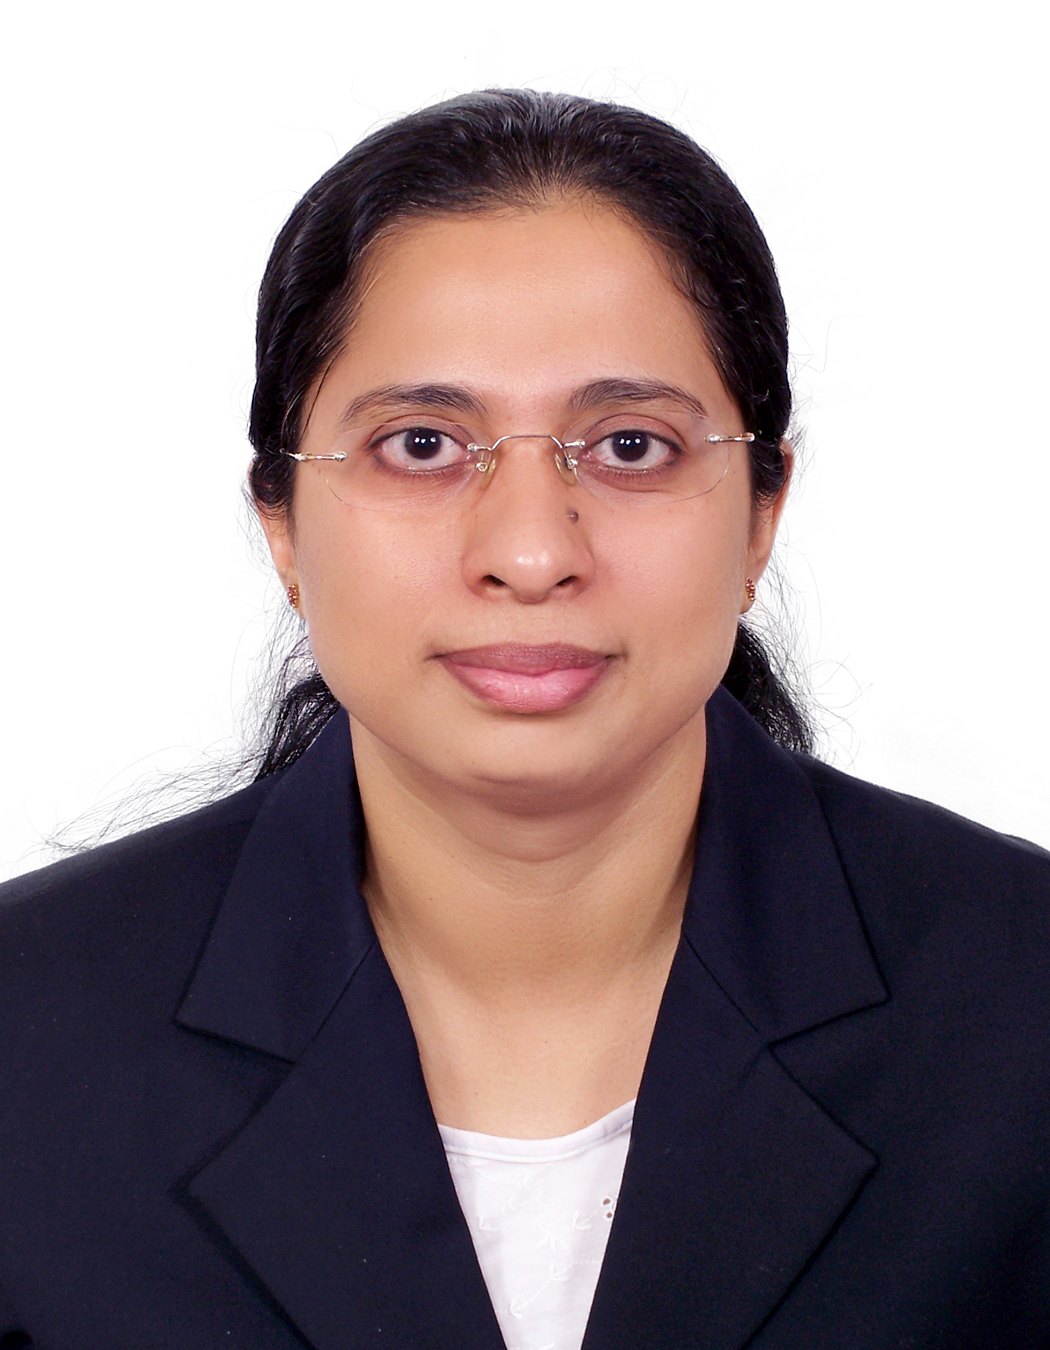 Profile picture of Dr. Anna Jacob